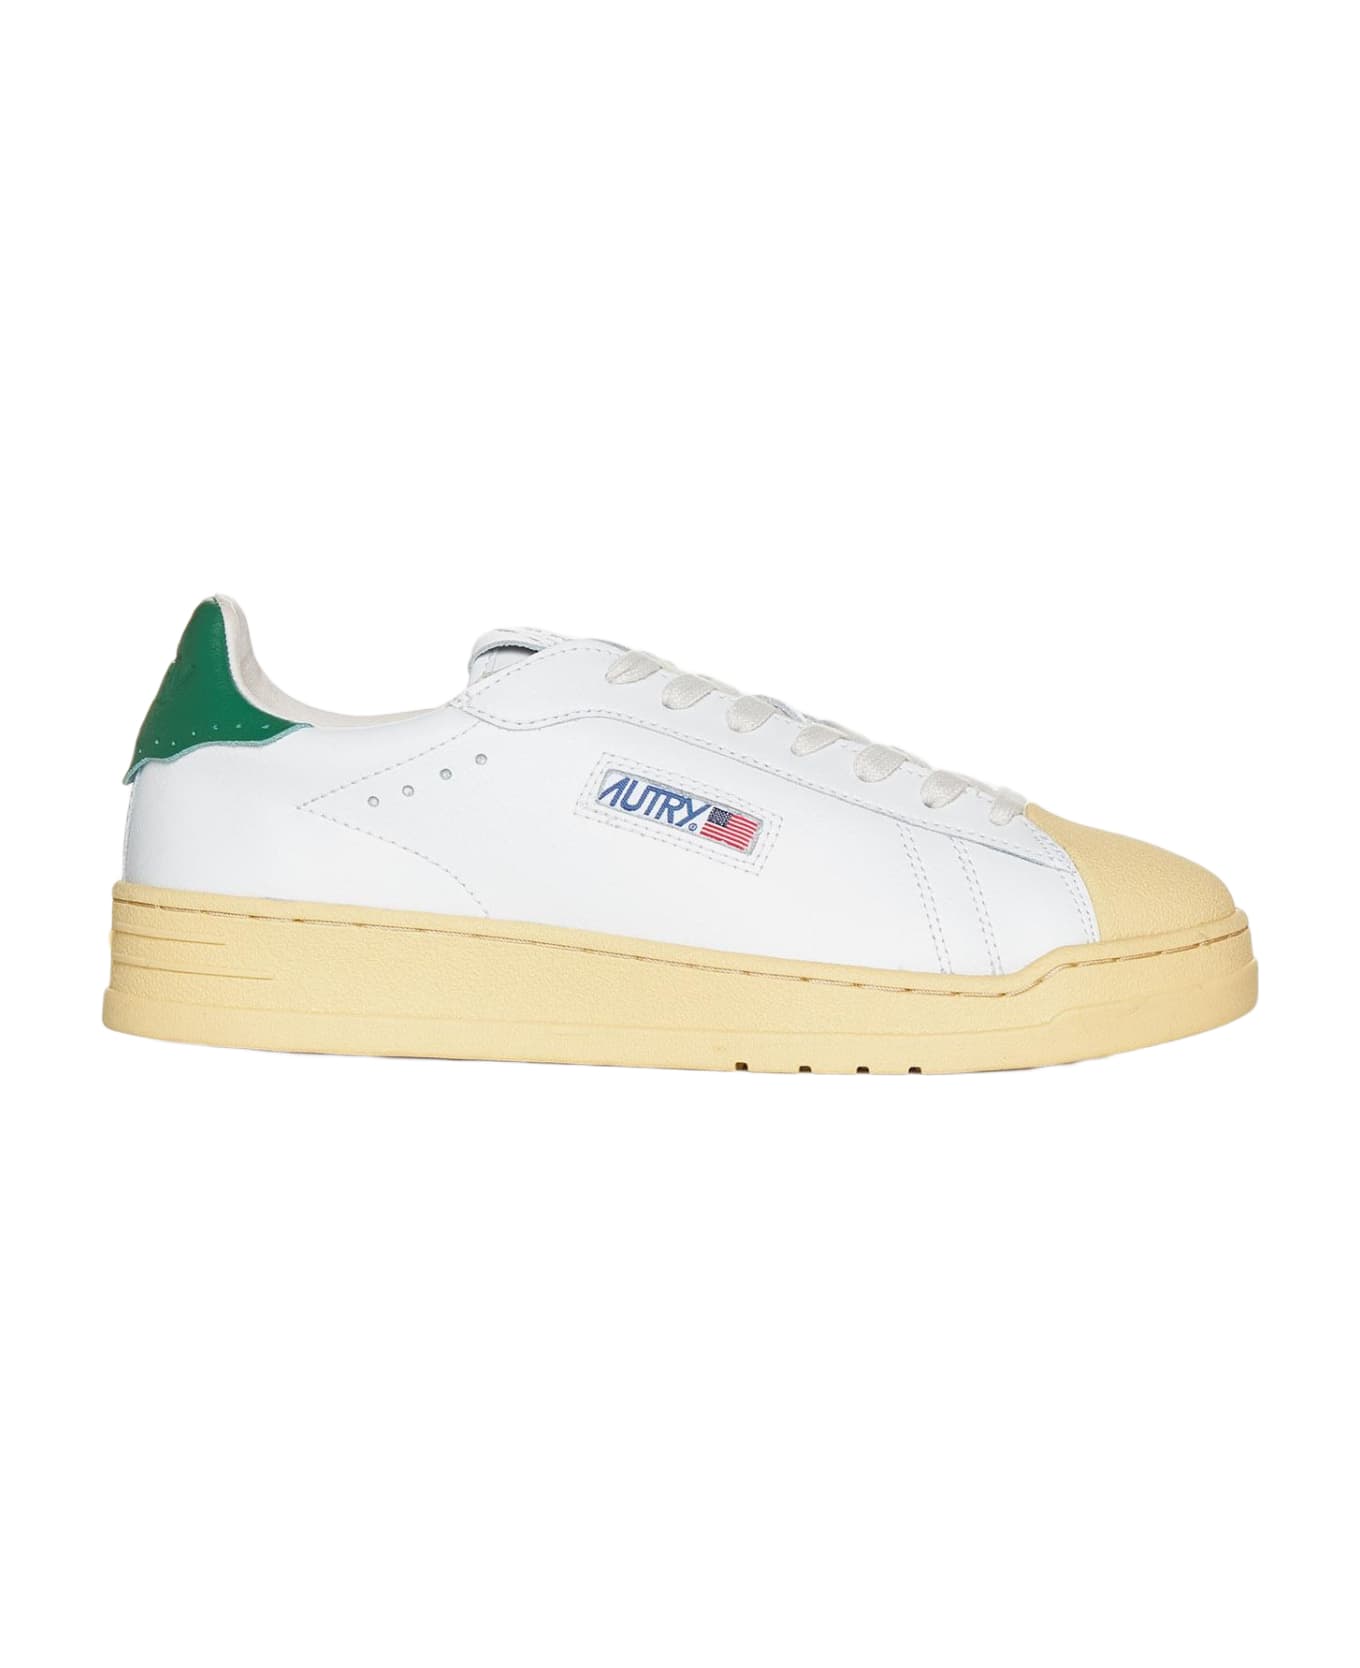 Autry Bob Lutz Low-top Leather Sneakers - White, green スニーカー